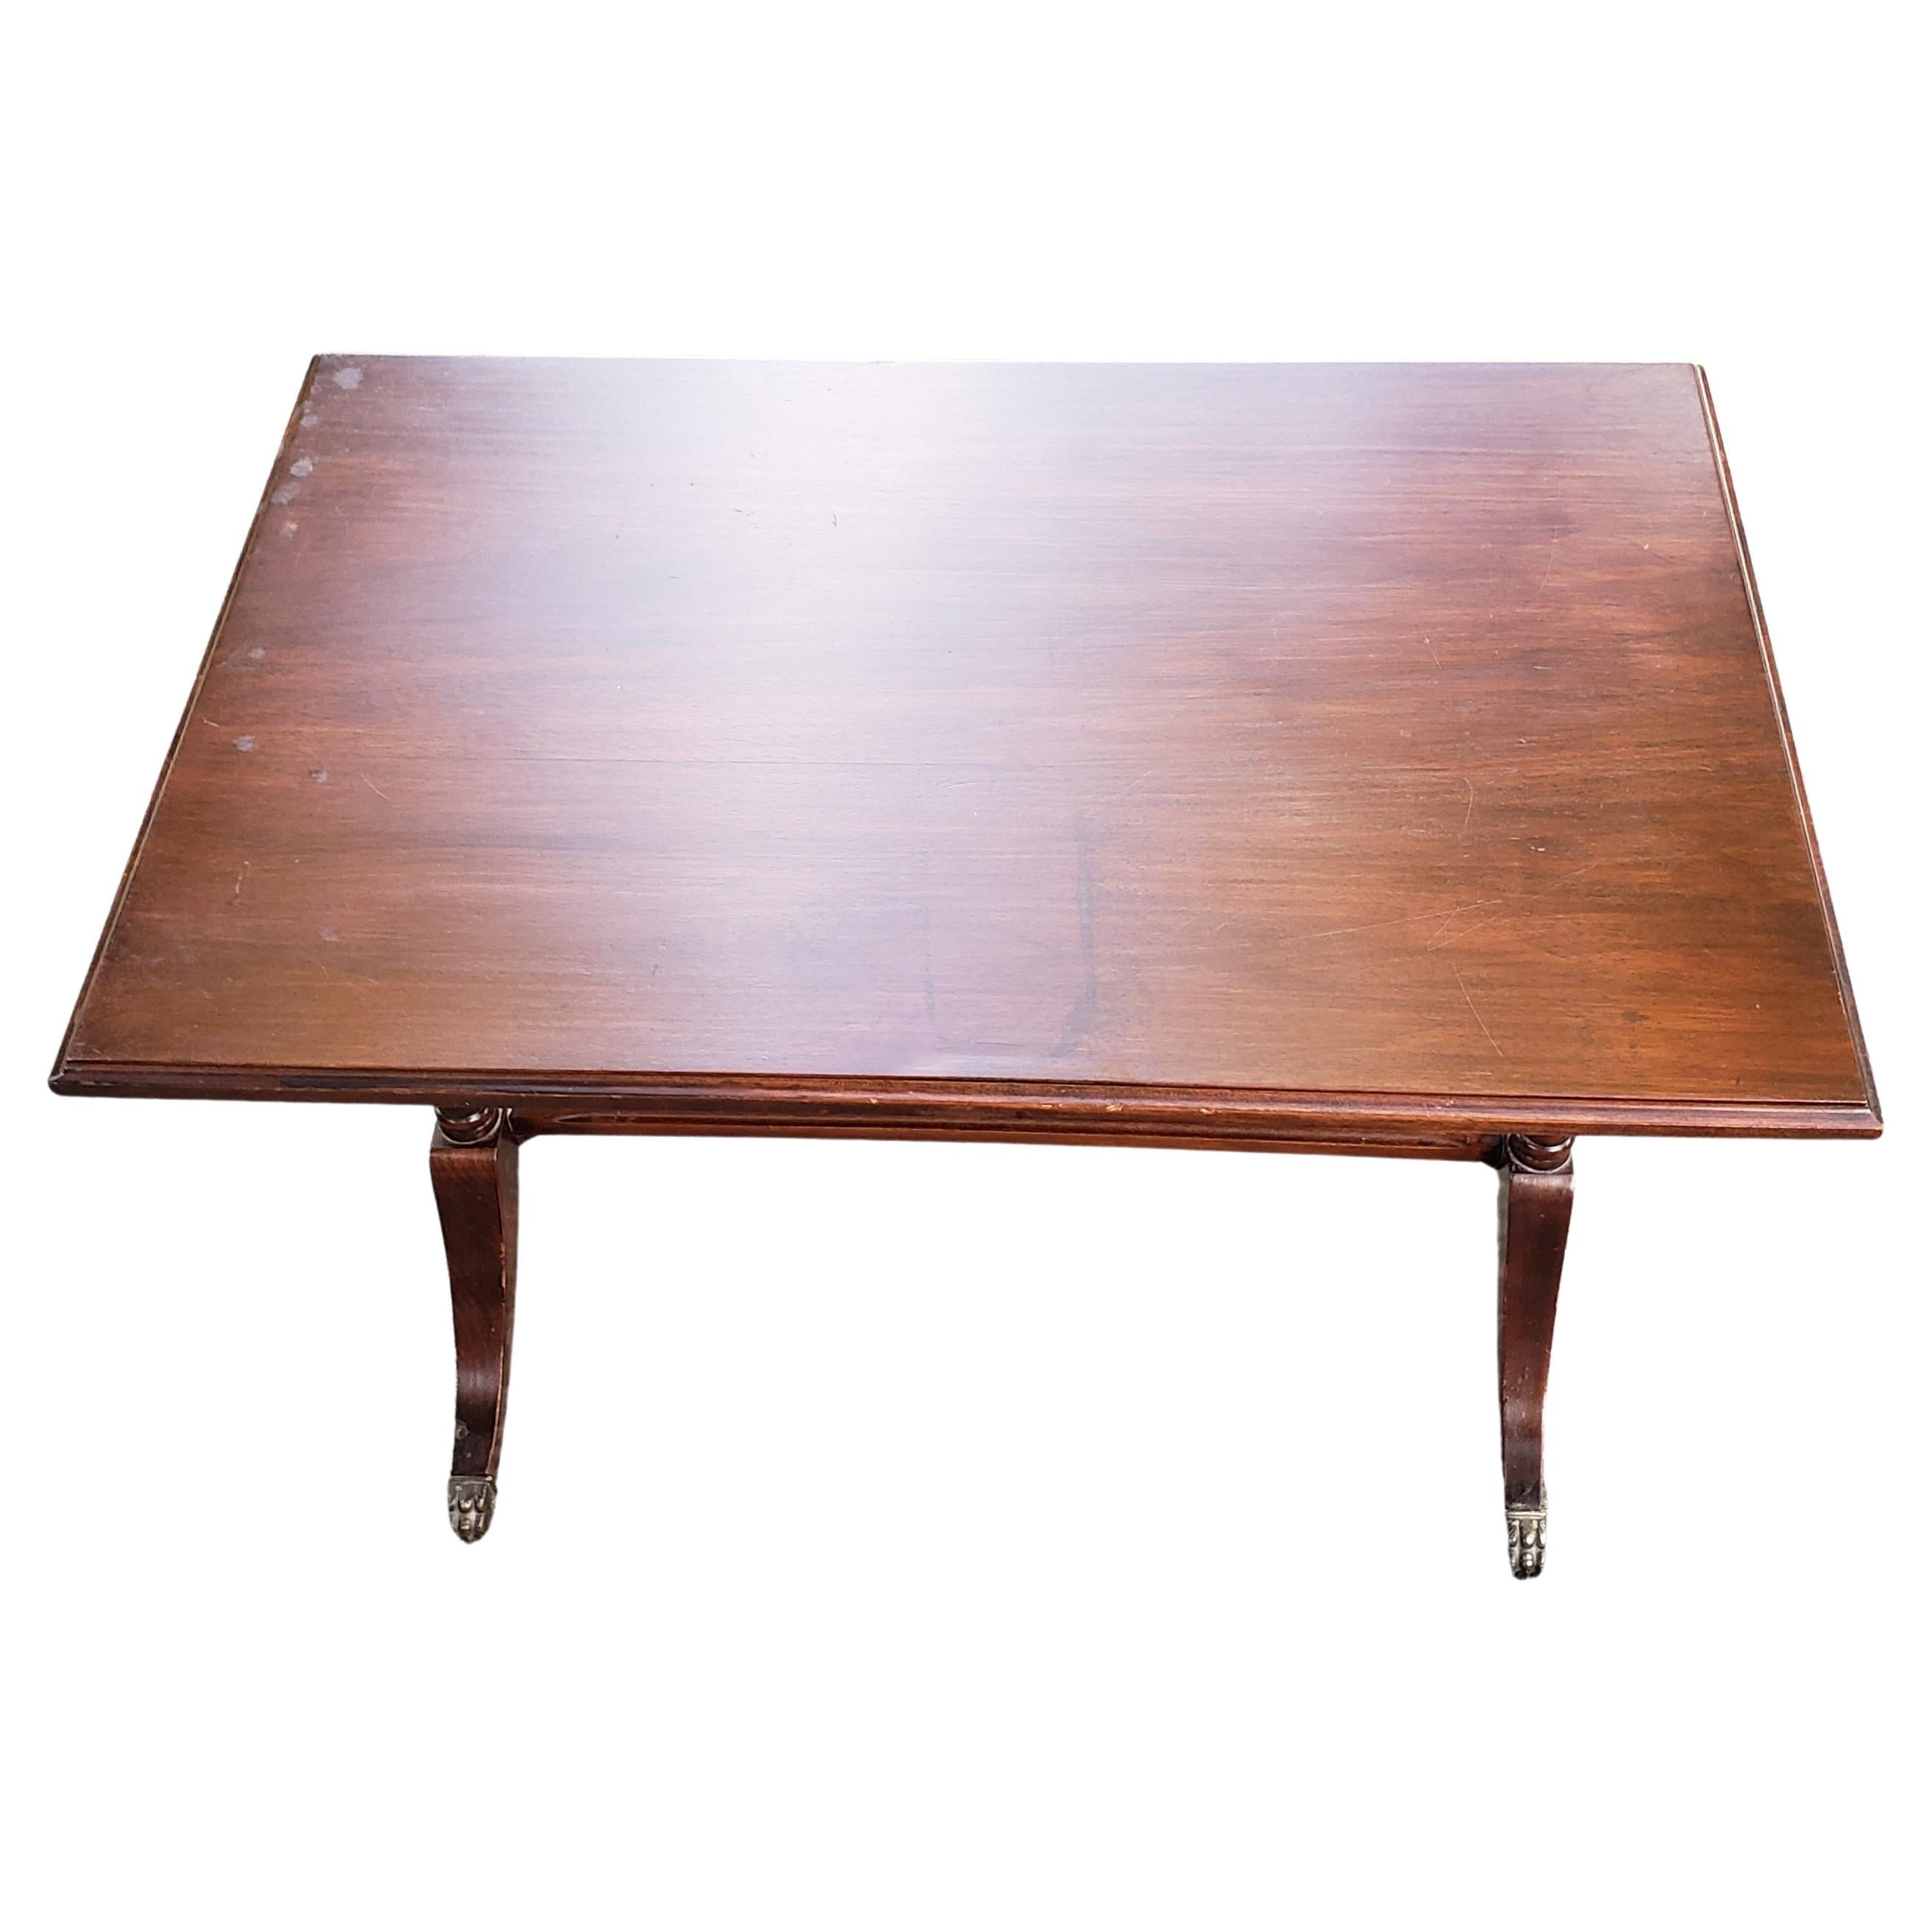 American mahogany tea table / coffee table for small spaces. Good vintage condition.
Measures 28